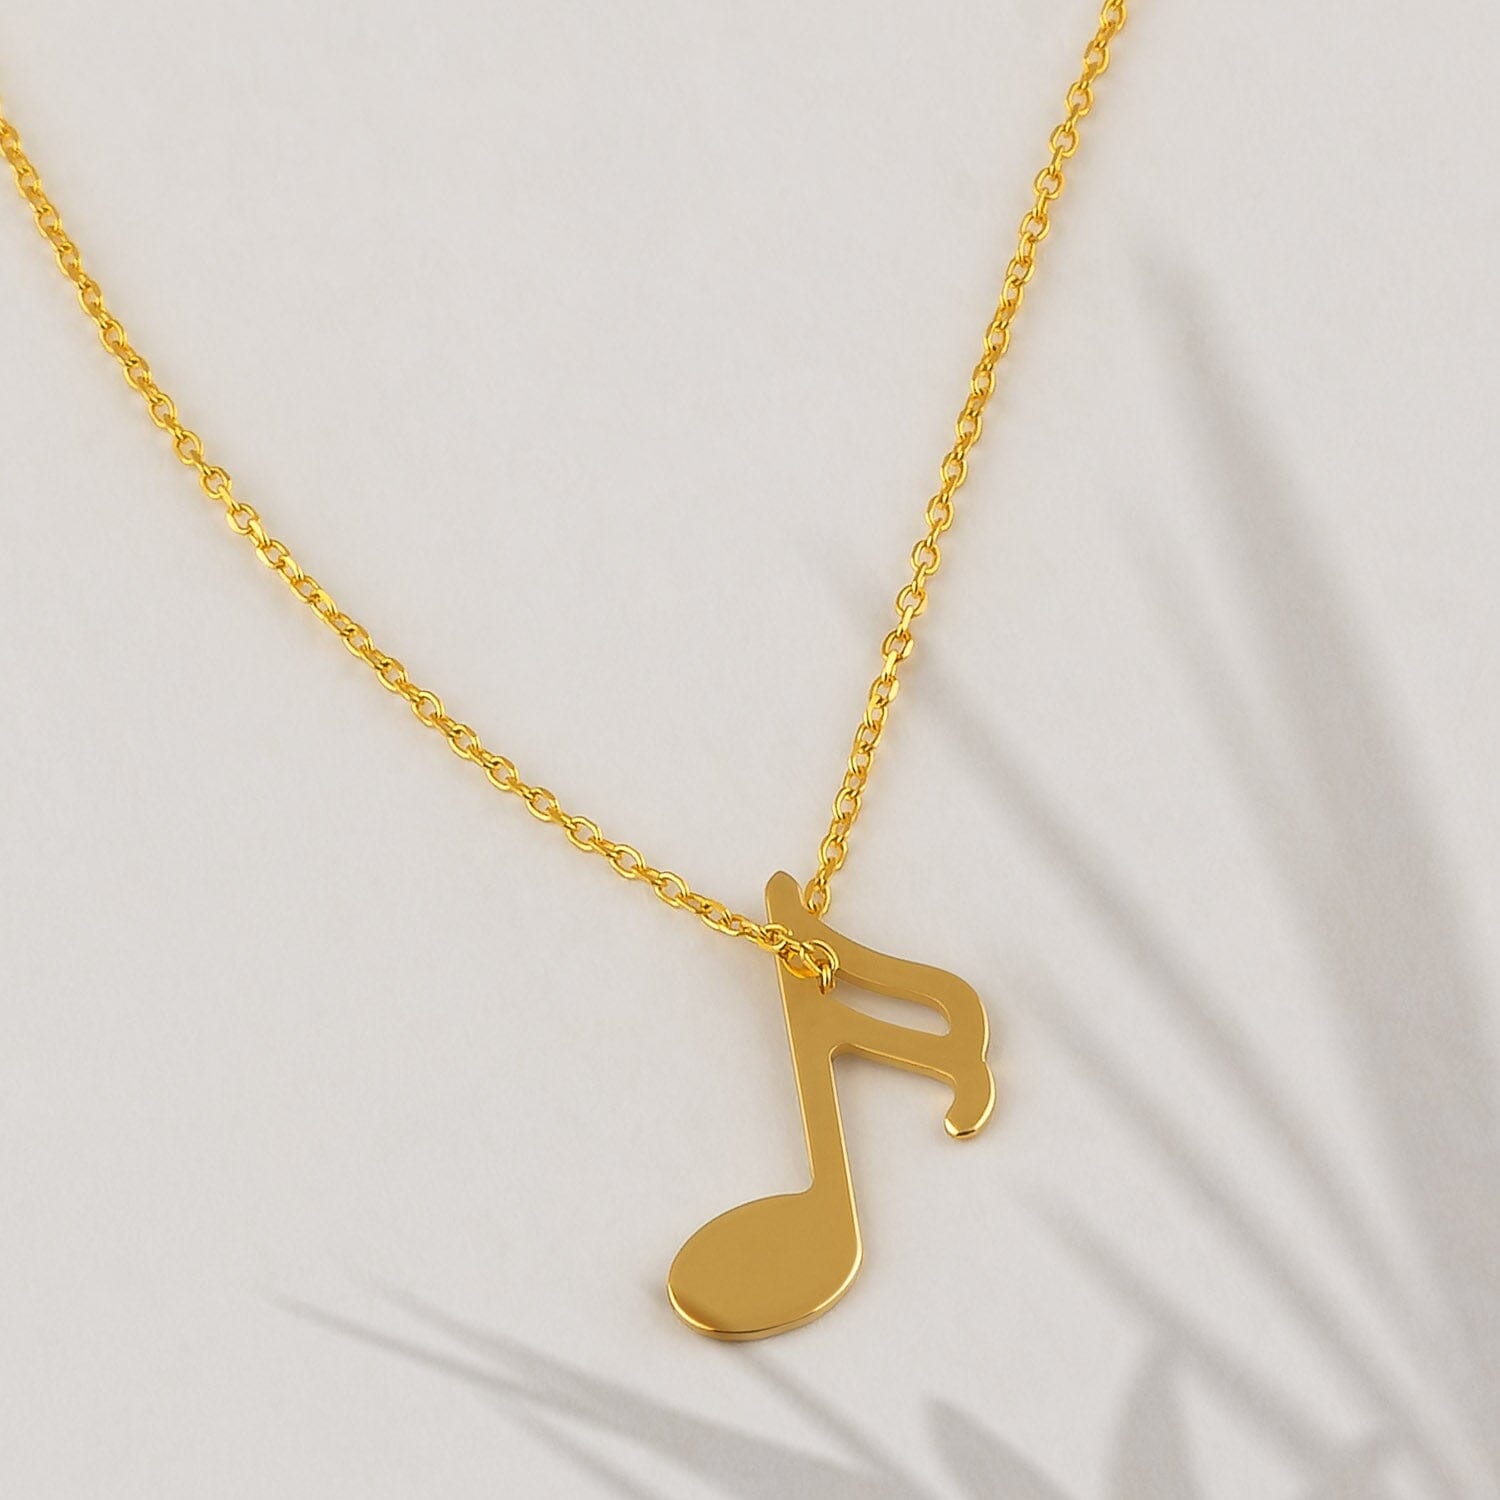 G Clef / Treble Clef Music Note Necklace Silver - Music GiftFeatured  Products,Music Gifts,Products,Mothers Day Special – Music Bumblebees